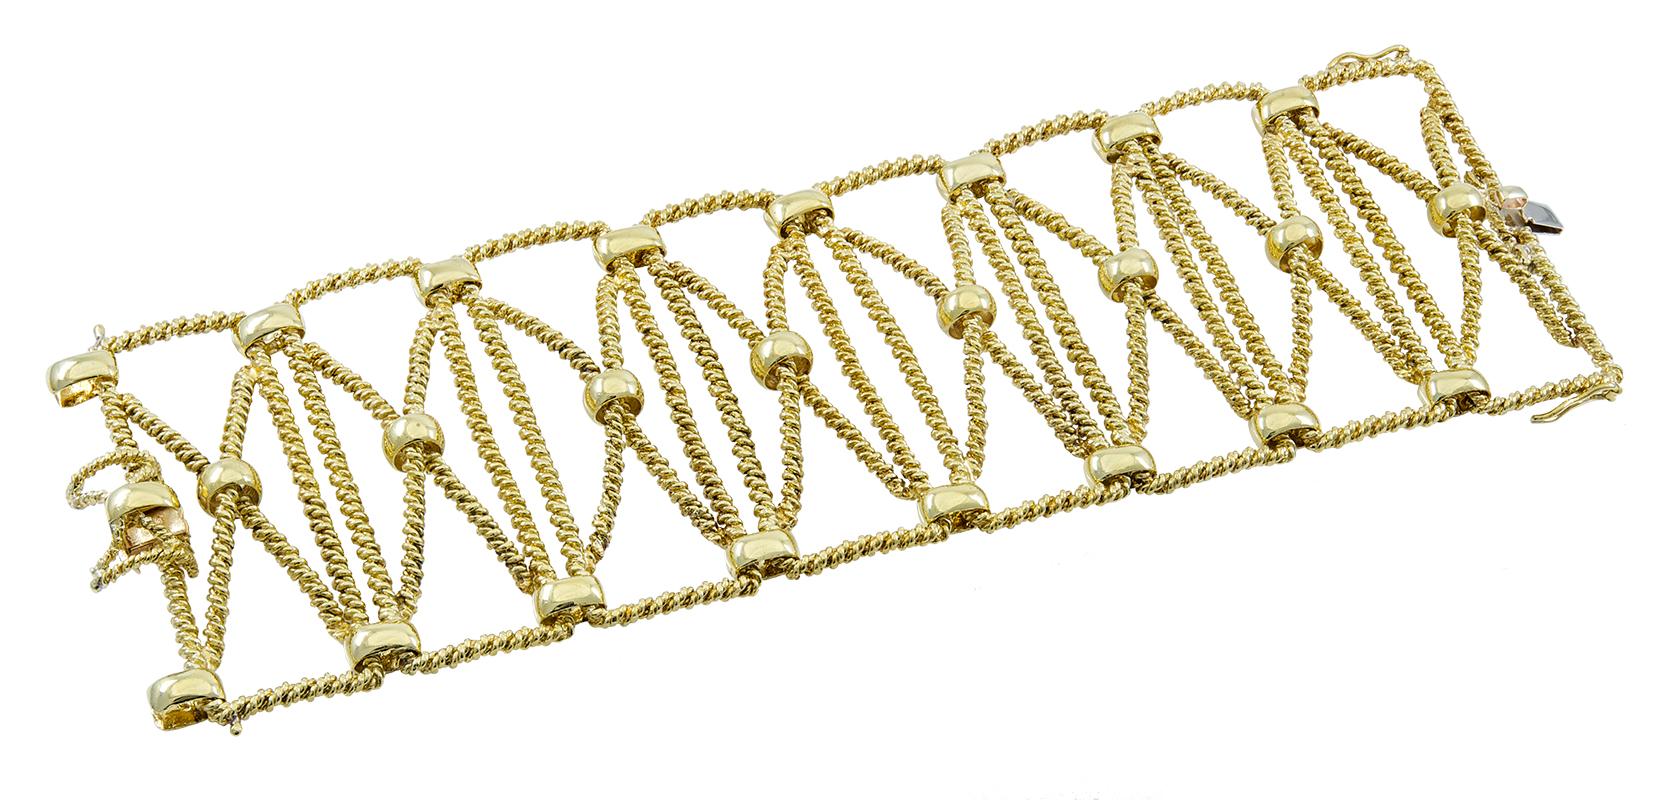 Extra-wide flexible bracelet.  Made and signed by TIFFANY & CO.  Heavy gauge 18K yellow gold.  Rope-twist  textured links, set with shiny gold balls.  7